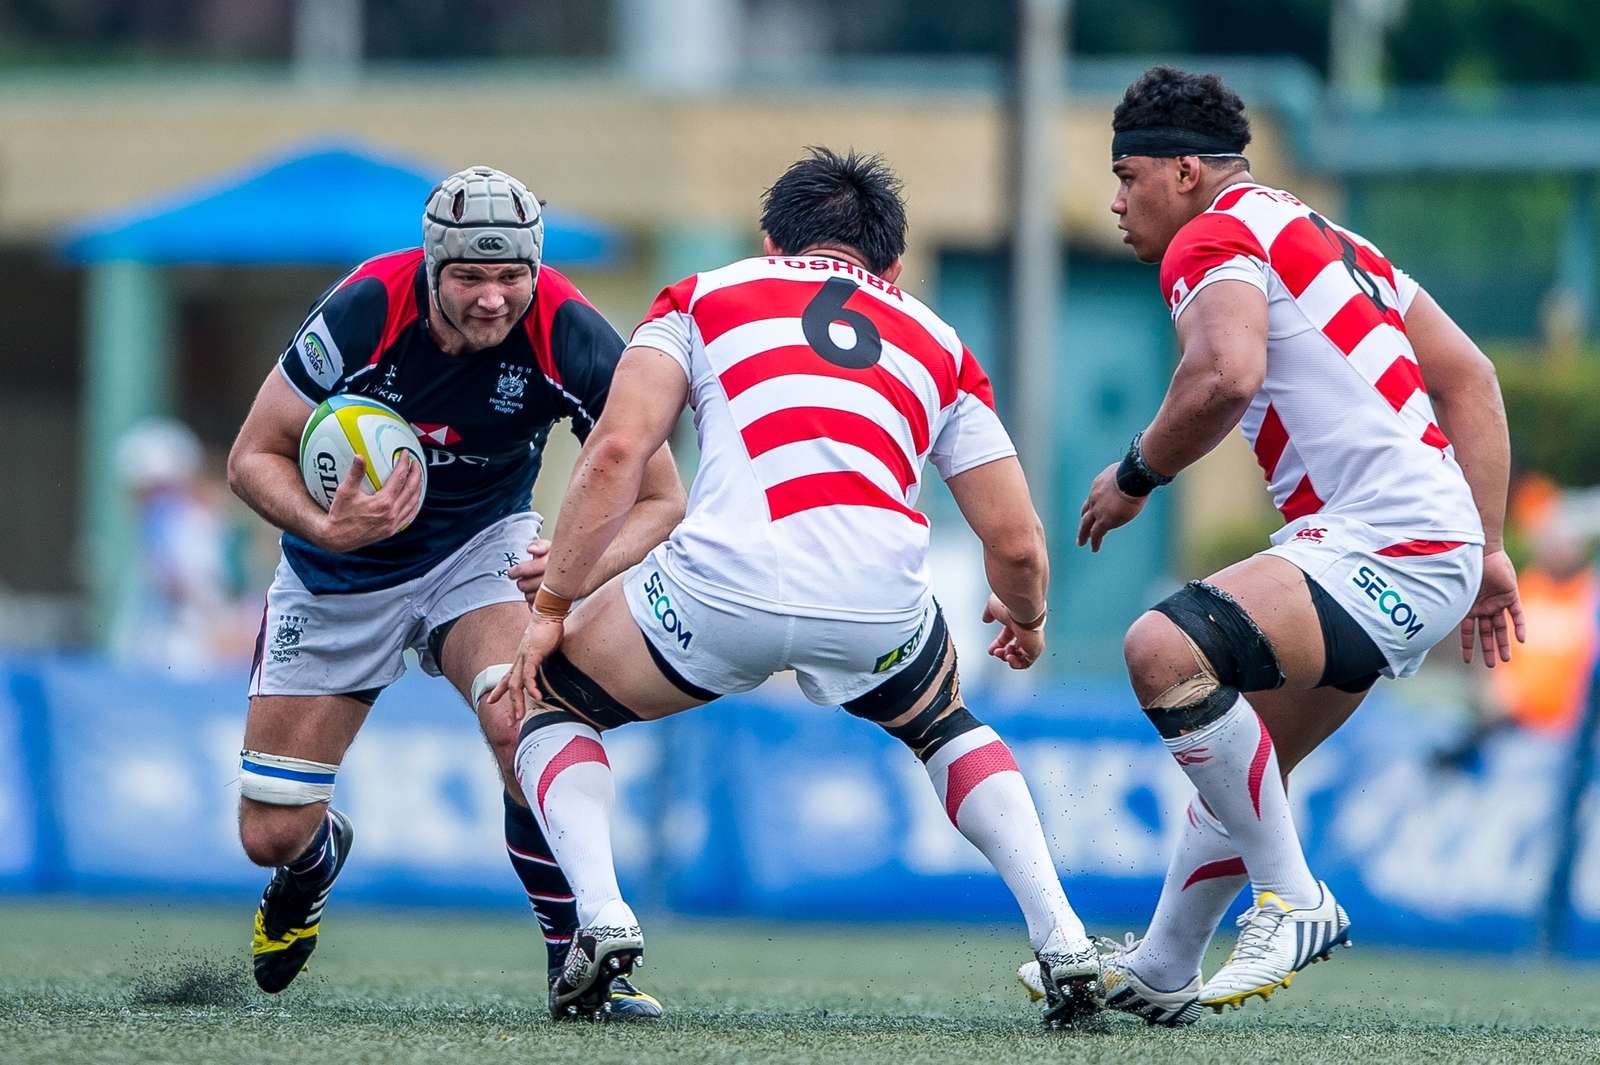 Hong Kong rugby captain Nick Hewson leads from the front against Japan in the Asia Rugby Championship. Photo: SCMP Picture